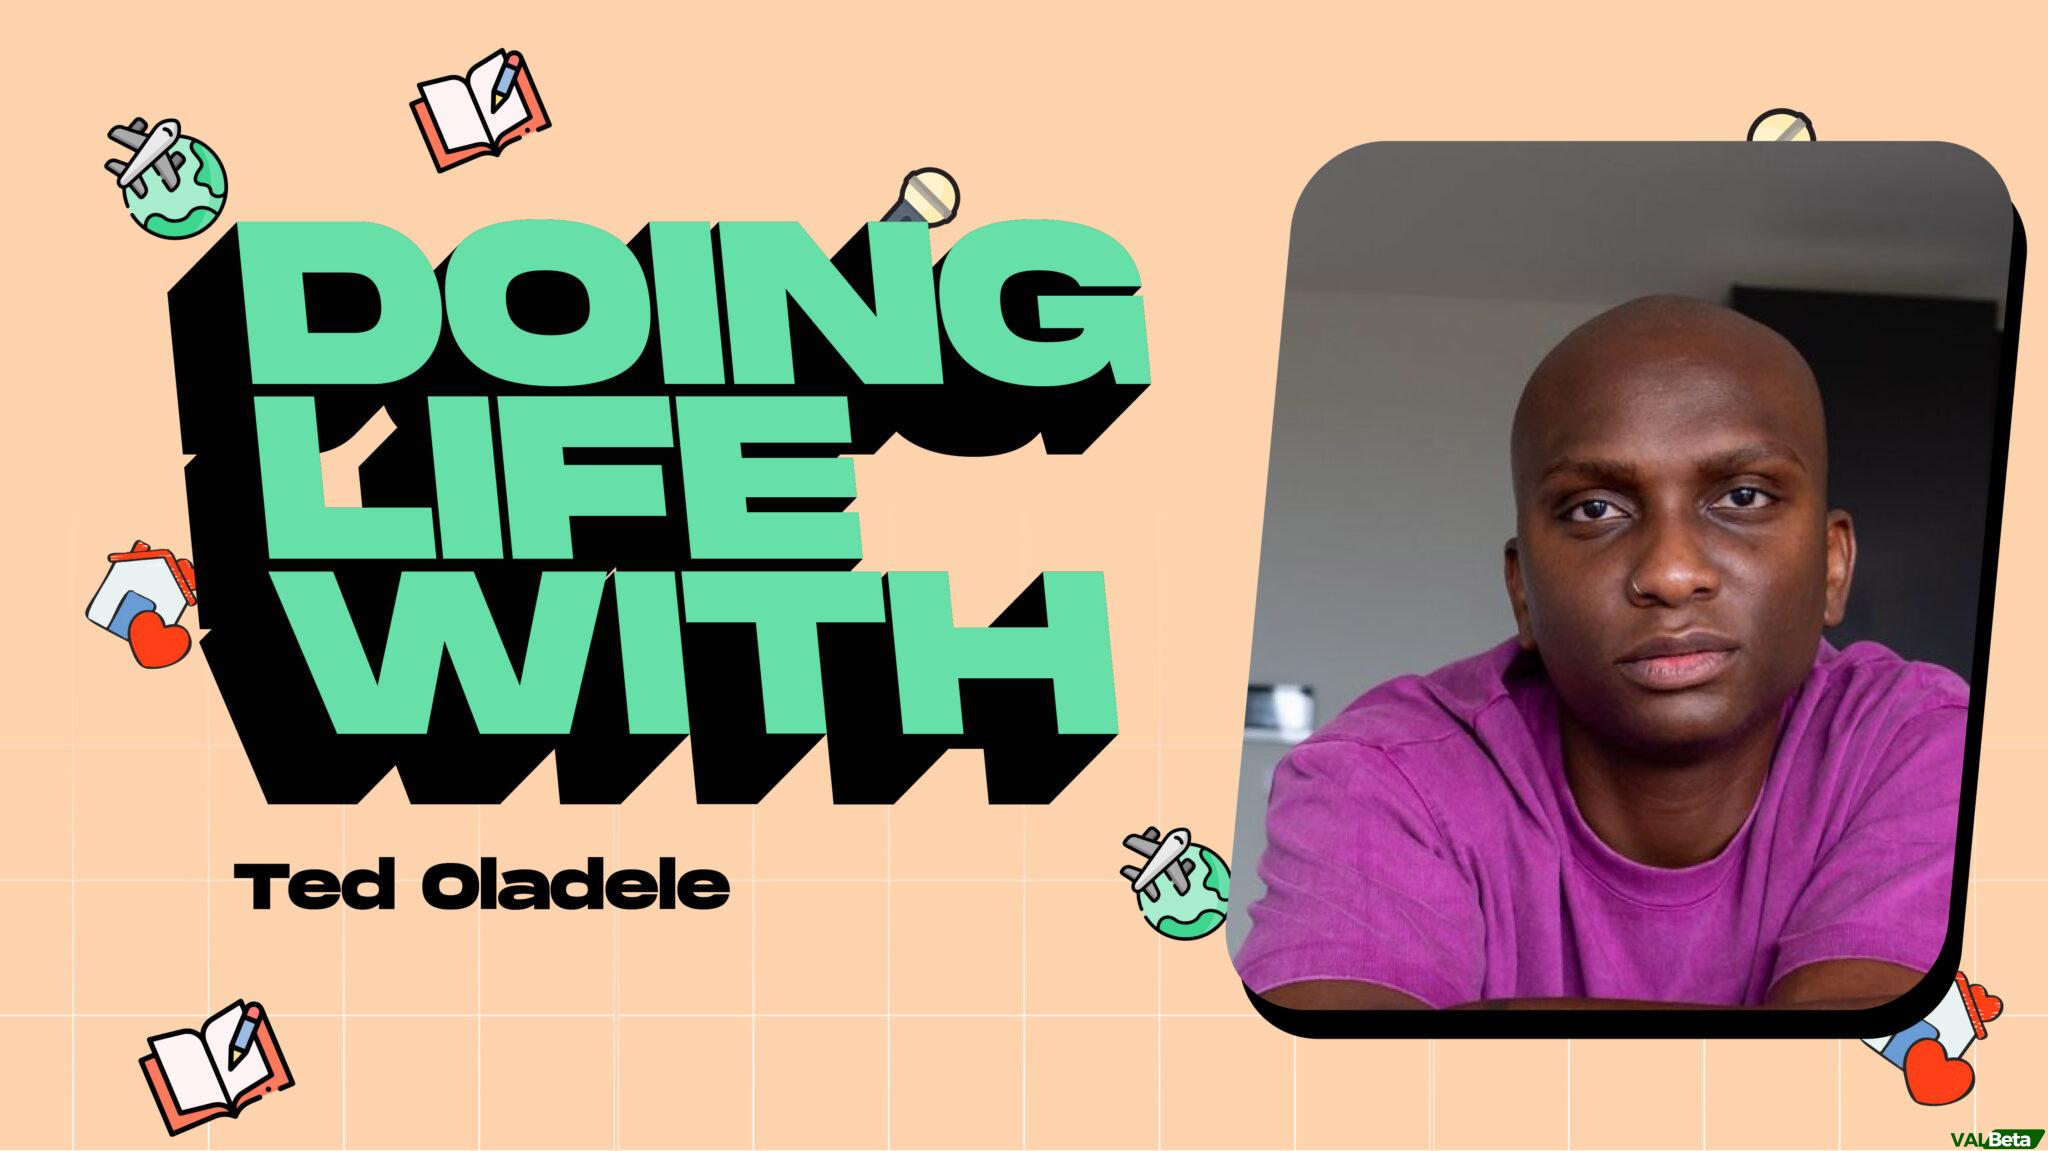 Learn More About Ted Oladele’s Tech Journey and His Motivation for Building Mira in Today’s “Doing Life With…”